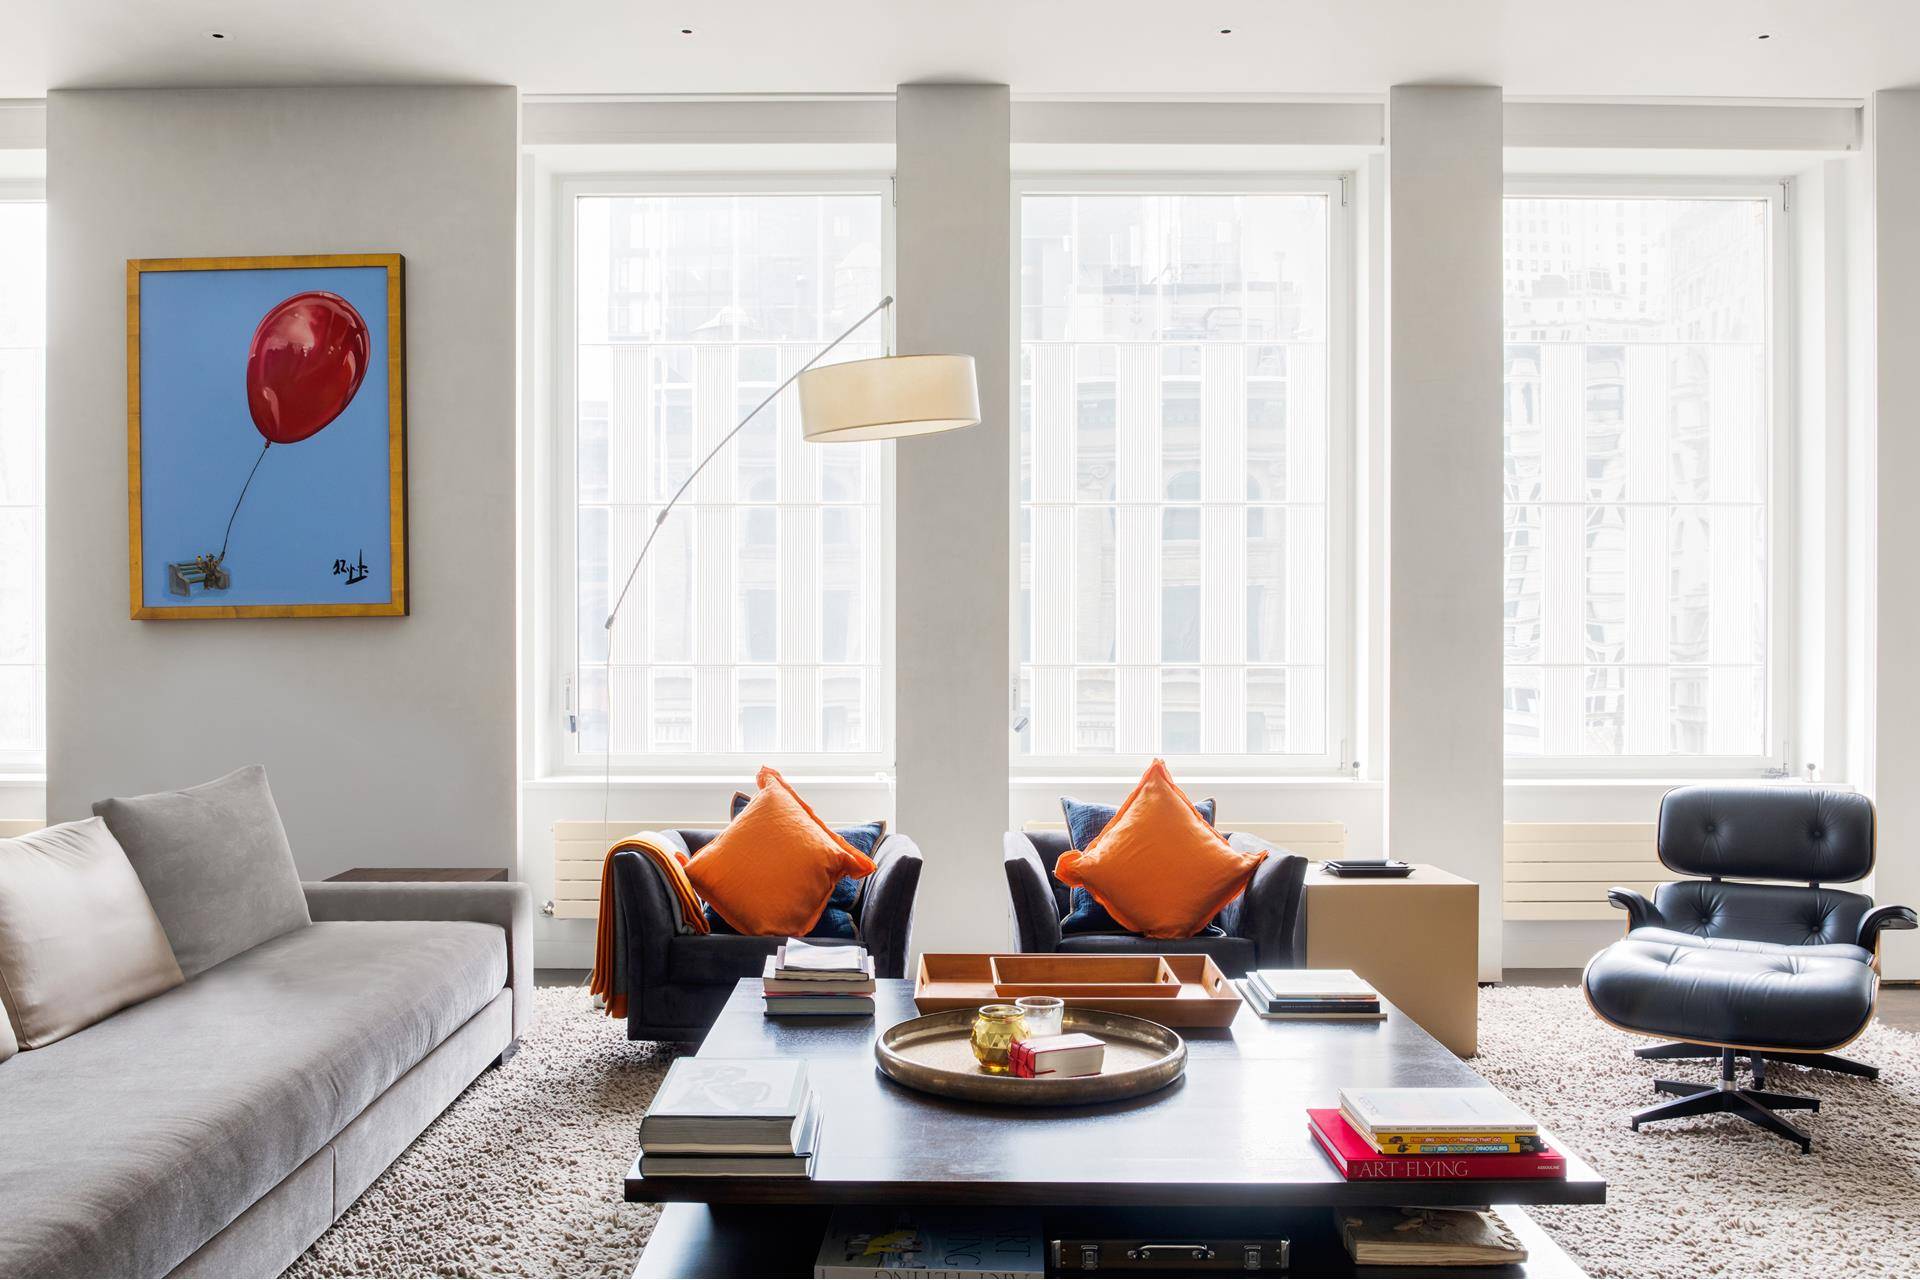 Designed by renowned architect and the current Dean of the School of Architecture at Yale, Residence 10 at 114 Liberty Street is an inventive 5, 400 square foot, full floor ...